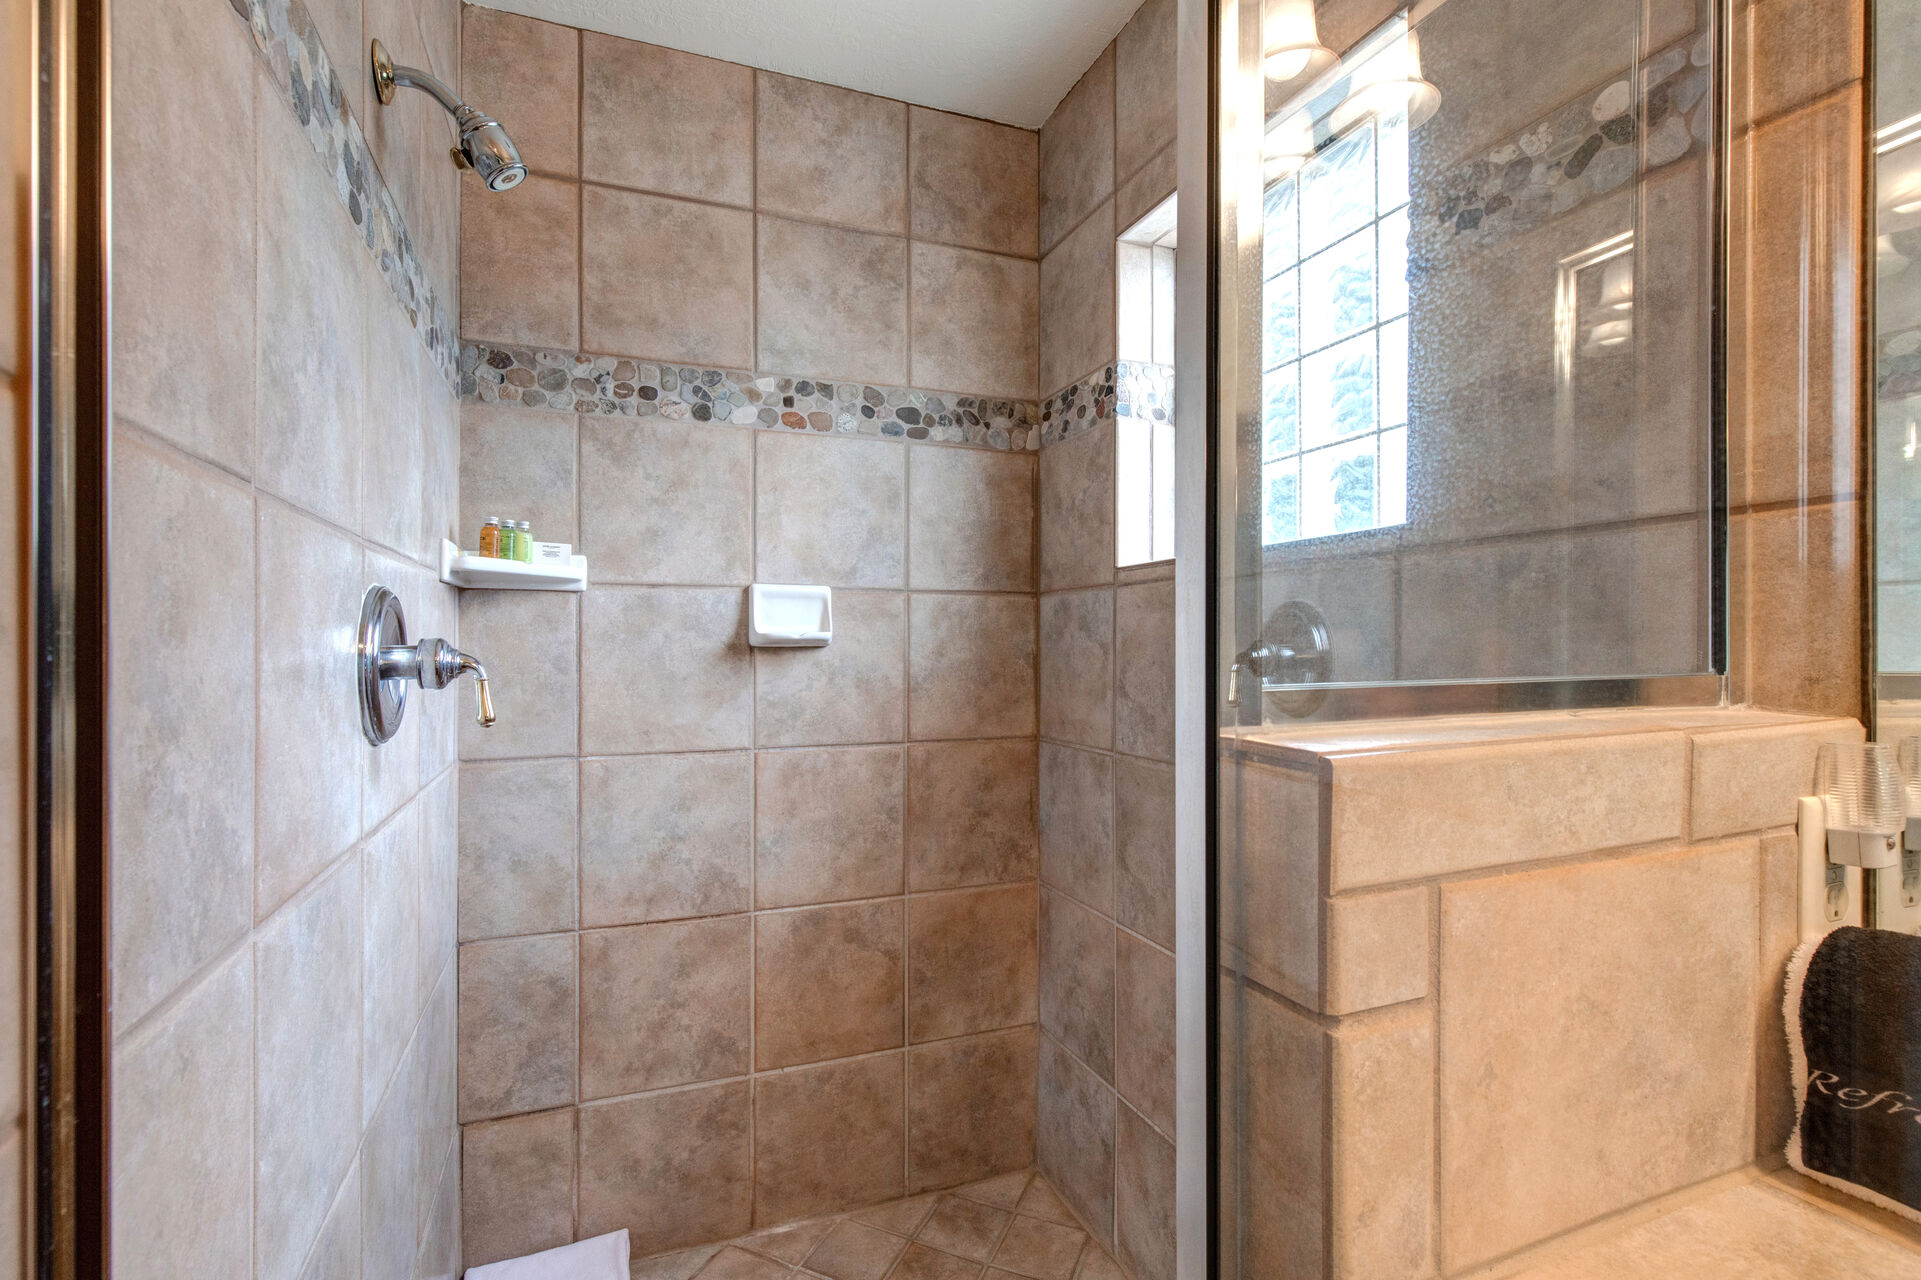 Master Bathroom with double vanities, jetted tub, and glass & tile shower